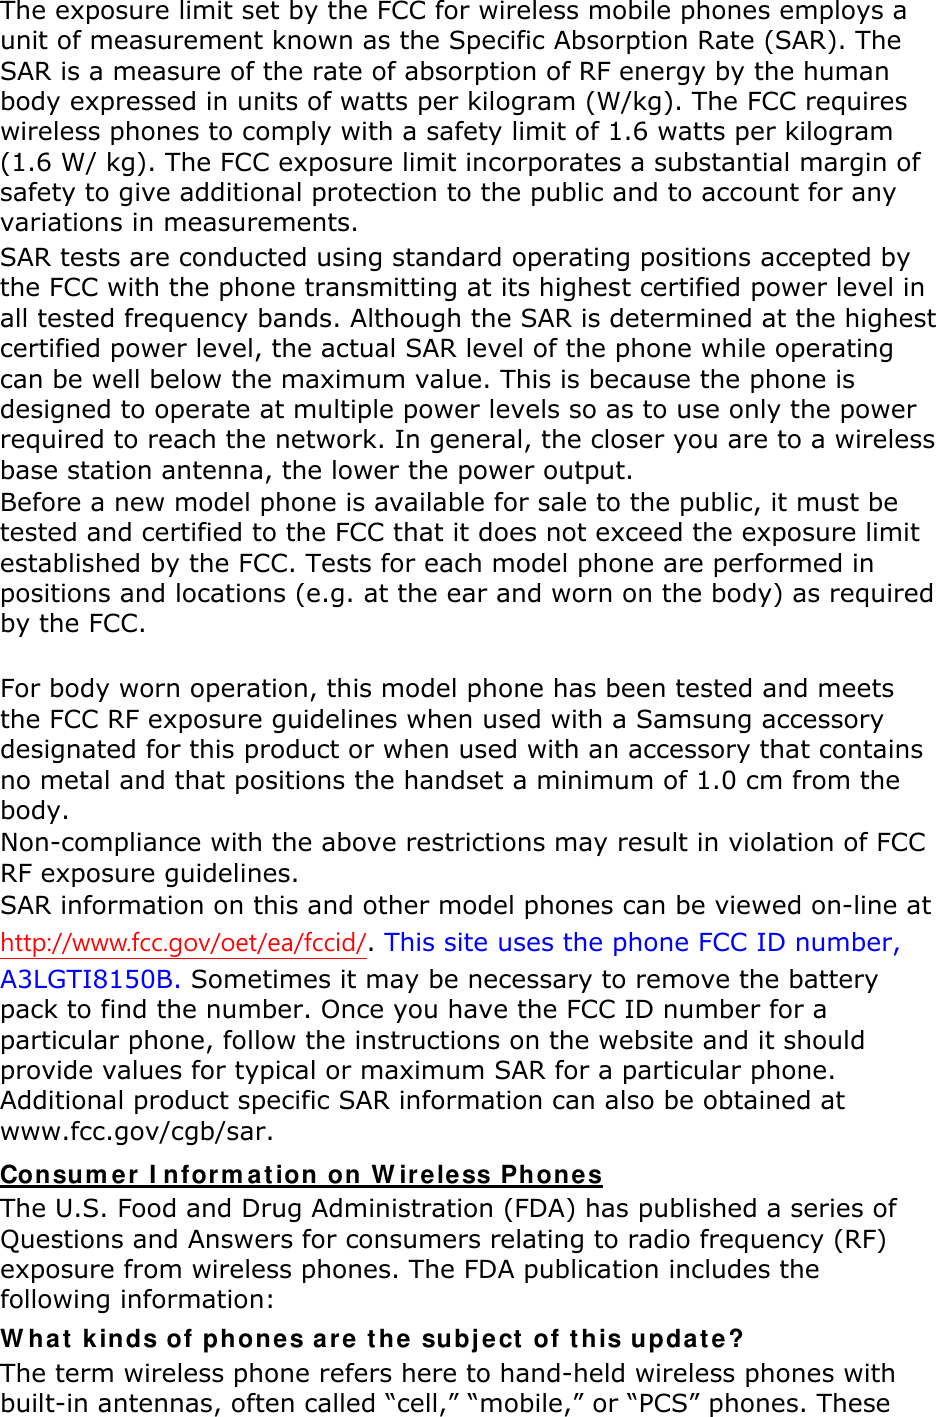 The exposure limit set by the FCC for wireless mobile phones employs a unit of measurement known as the Specific Absorption Rate (SAR). The SAR is a measure of the rate of absorption of RF energy by the human body expressed in units of watts per kilogram (W/kg). The FCC requires wireless phones to comply with a safety limit of 1.6 watts per kilogram (1.6 W/ kg). The FCC exposure limit incorporates a substantial margin of safety to give additional protection to the public and to account for any variations in measurements. SAR tests are conducted using standard operating positions accepted by the FCC with the phone transmitting at its highest certified power level in all tested frequency bands. Although the SAR is determined at the highest certified power level, the actual SAR level of the phone while operating can be well below the maximum value. This is because the phone is designed to operate at multiple power levels so as to use only the power required to reach the network. In general, the closer you are to a wireless base station antenna, the lower the power output. Before a new model phone is available for sale to the public, it must be tested and certified to the FCC that it does not exceed the exposure limit established by the FCC. Tests for each model phone are performed in positions and locations (e.g. at the ear and worn on the body) as required by the FCC.      For body worn operation, this model phone has been tested and meets the FCC RF exposure guidelines when used with a Samsung accessory designated for this product or when used with an accessory that contains no metal and that positions the handset a minimum of 1.0 cm from the body.   Non-compliance with the above restrictions may result in violation of FCC RF exposure guidelines. SAR information on this and other model phones can be viewed on-line at http://www.fcc.gov/oet/ea/fccid/. This site uses the phone FCC ID number, A3LGTI8150B. Sometimes it may be necessary to remove the battery pack to find the number. Once you have the FCC ID number for a particular phone, follow the instructions on the website and it should provide values for typical or maximum SAR for a particular phone. Additional product specific SAR information can also be obtained at www.fcc.gov/cgb/sar. Consumer Information on Wireless Phones The U.S. Food and Drug Administration (FDA) has published a series of Questions and Answers for consumers relating to radio frequency (RF) exposure from wireless phones. The FDA publication includes the following information: What kinds of phones are the subject of this update? The term wireless phone refers here to hand-held wireless phones with built-in antennas, often called “cell,” “mobile,” or “PCS” phones. These 